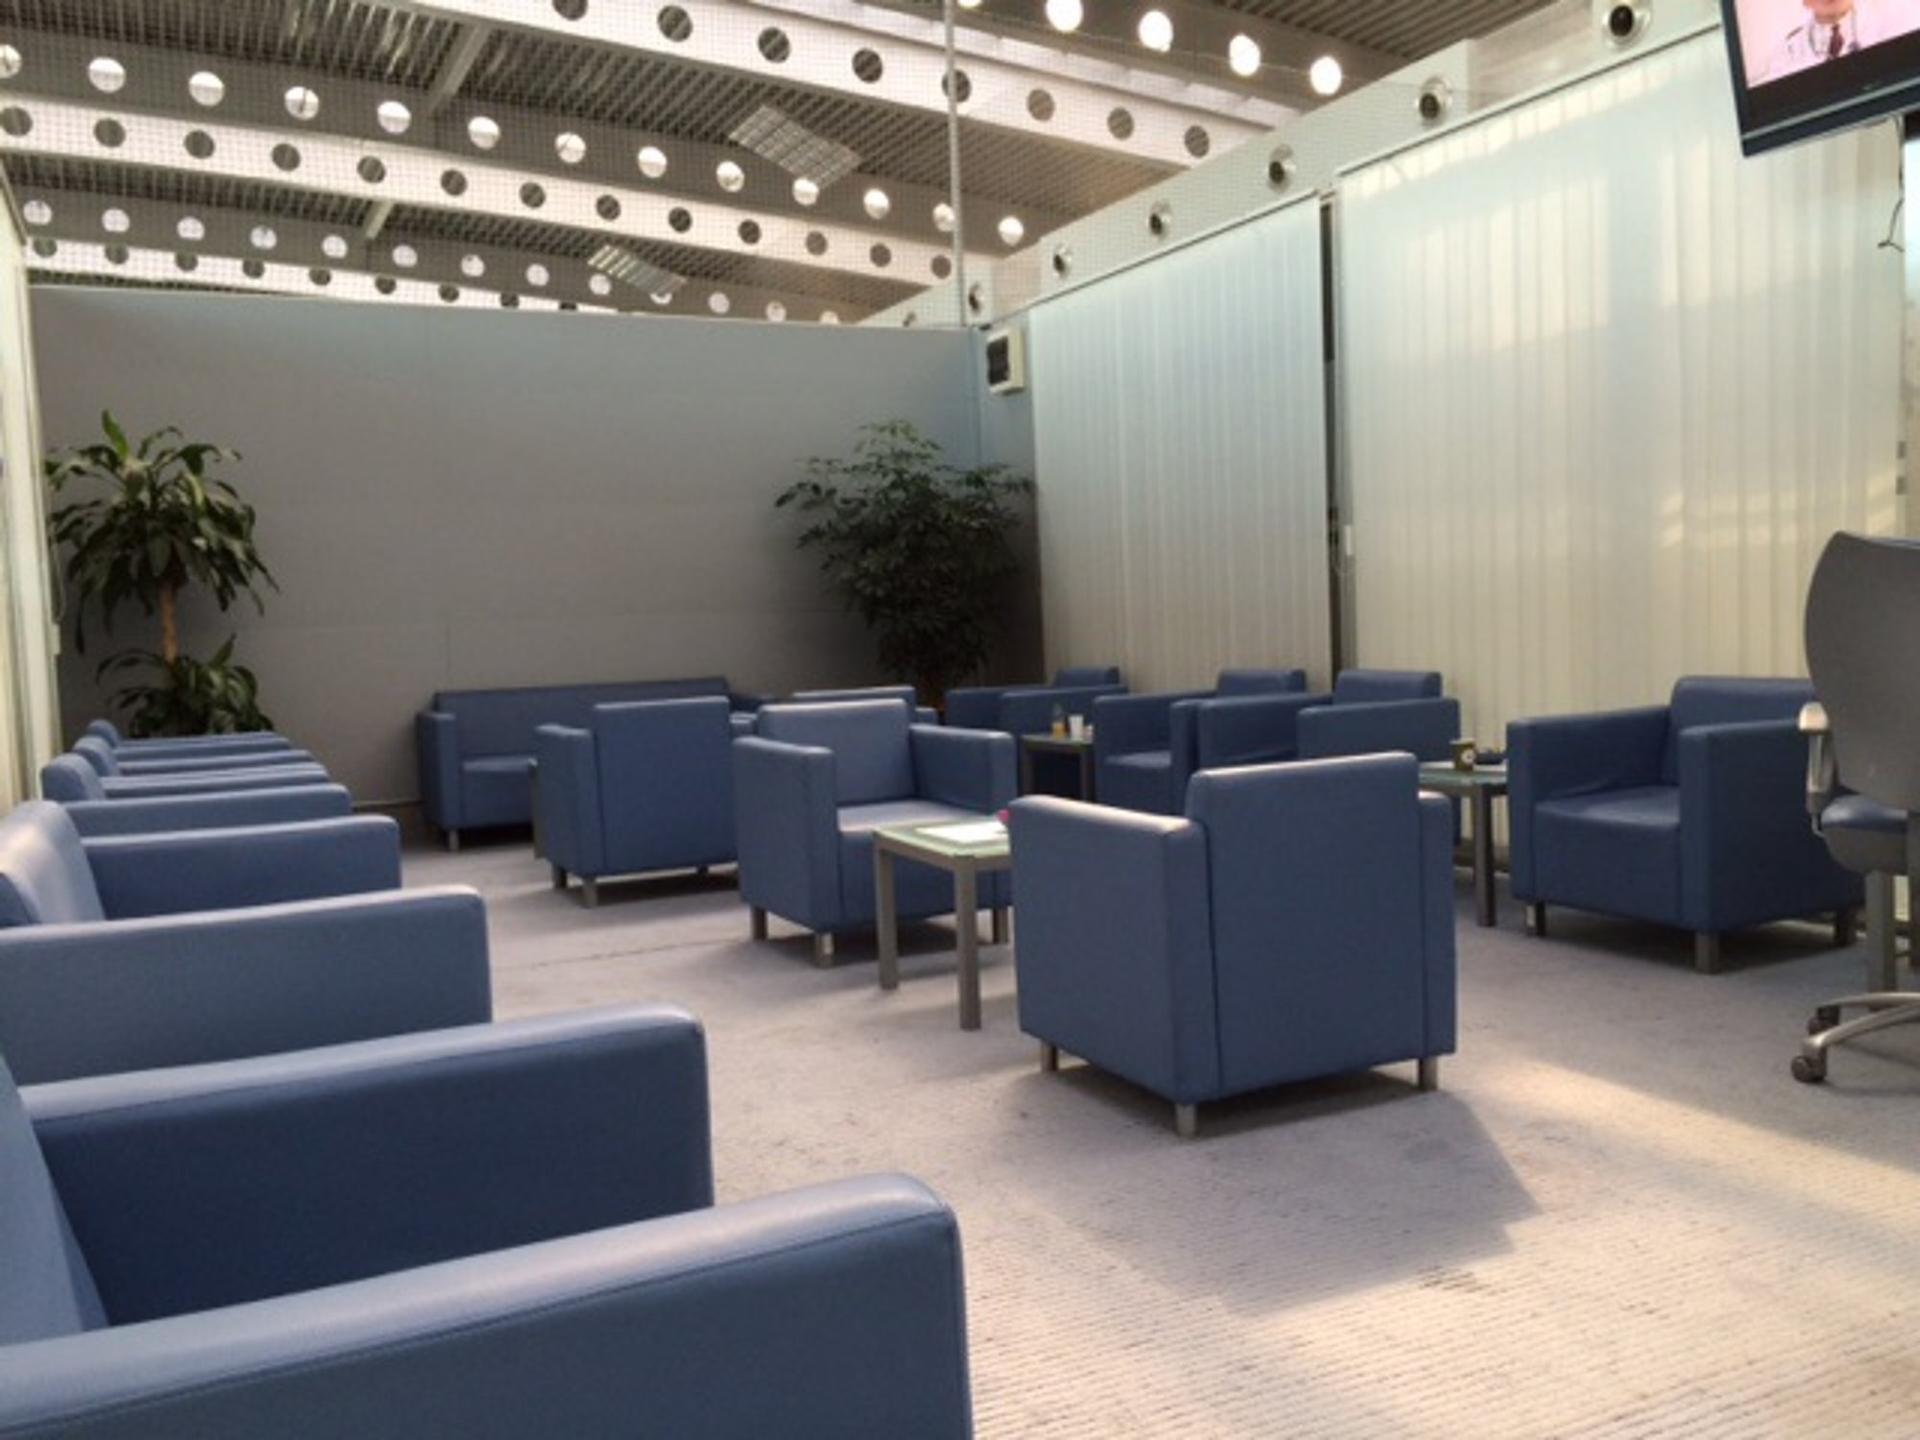 Airport Business Lounge image 4 of 7